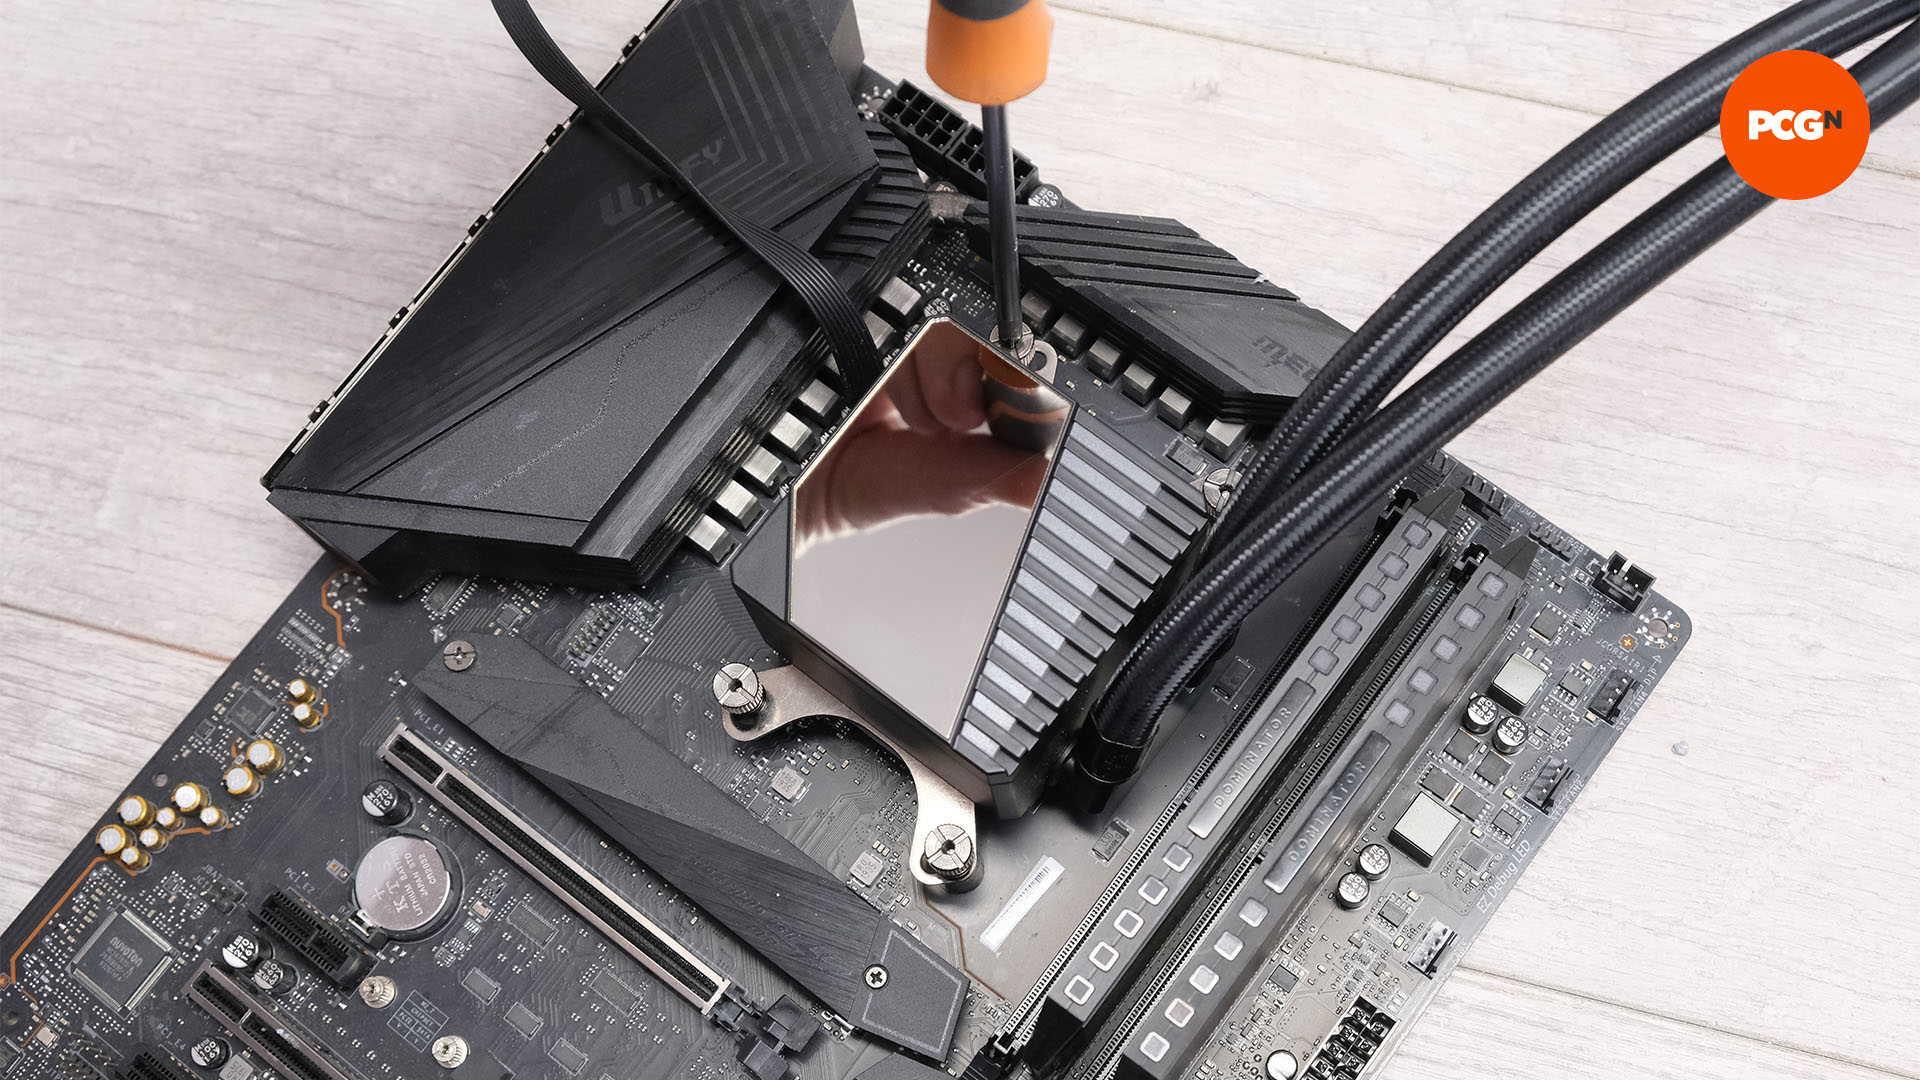 The AIO pump is screwed into the mounts on the motherboard